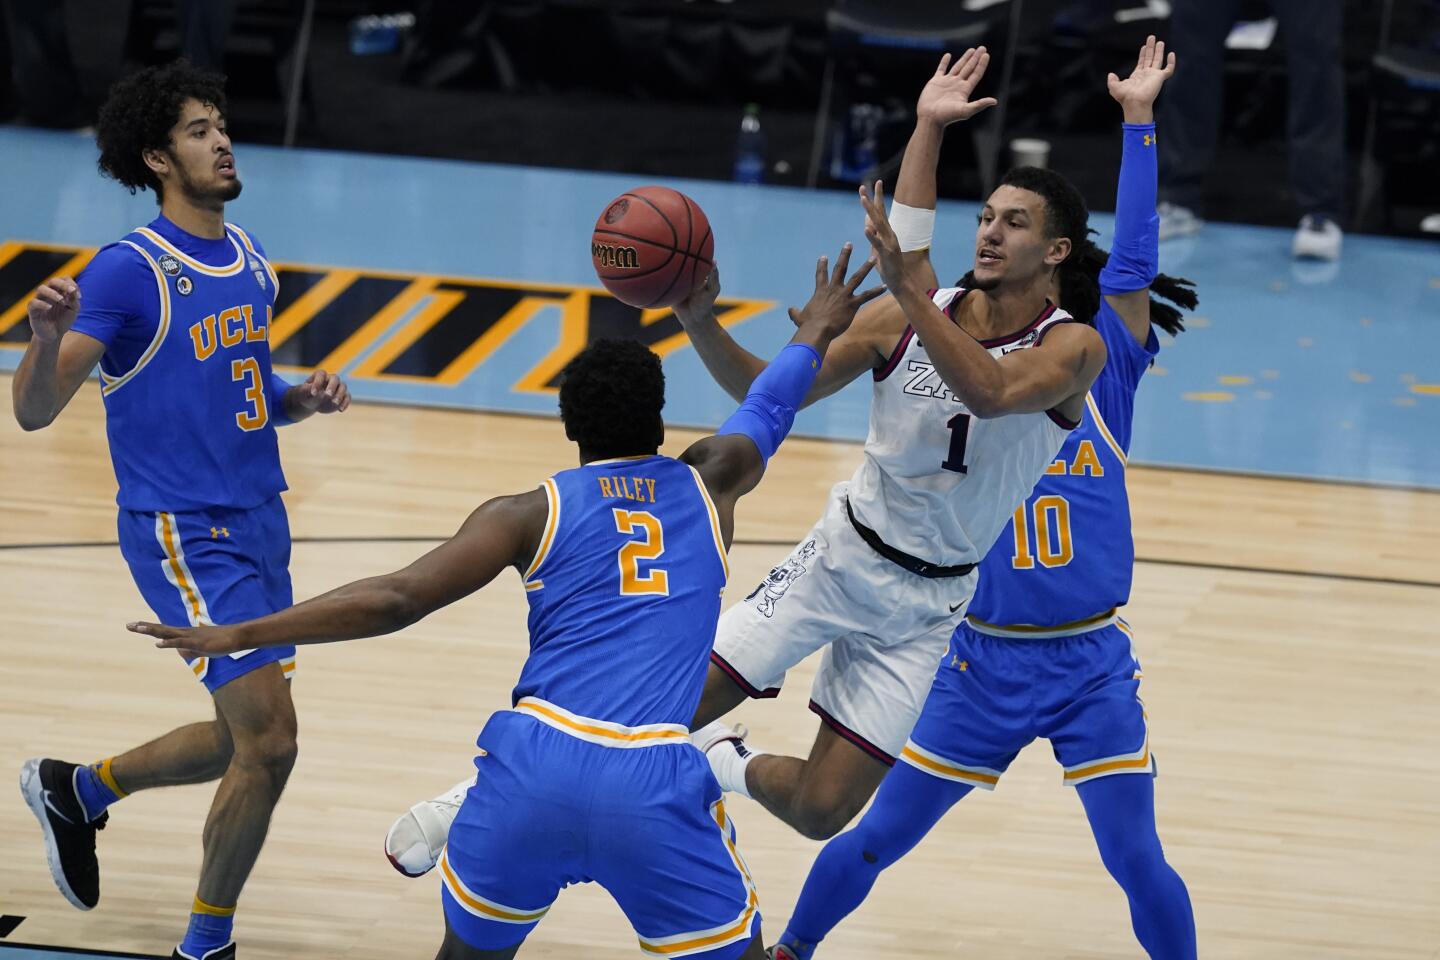 Three UCLA players surround a Gonzaga player who has the ball.